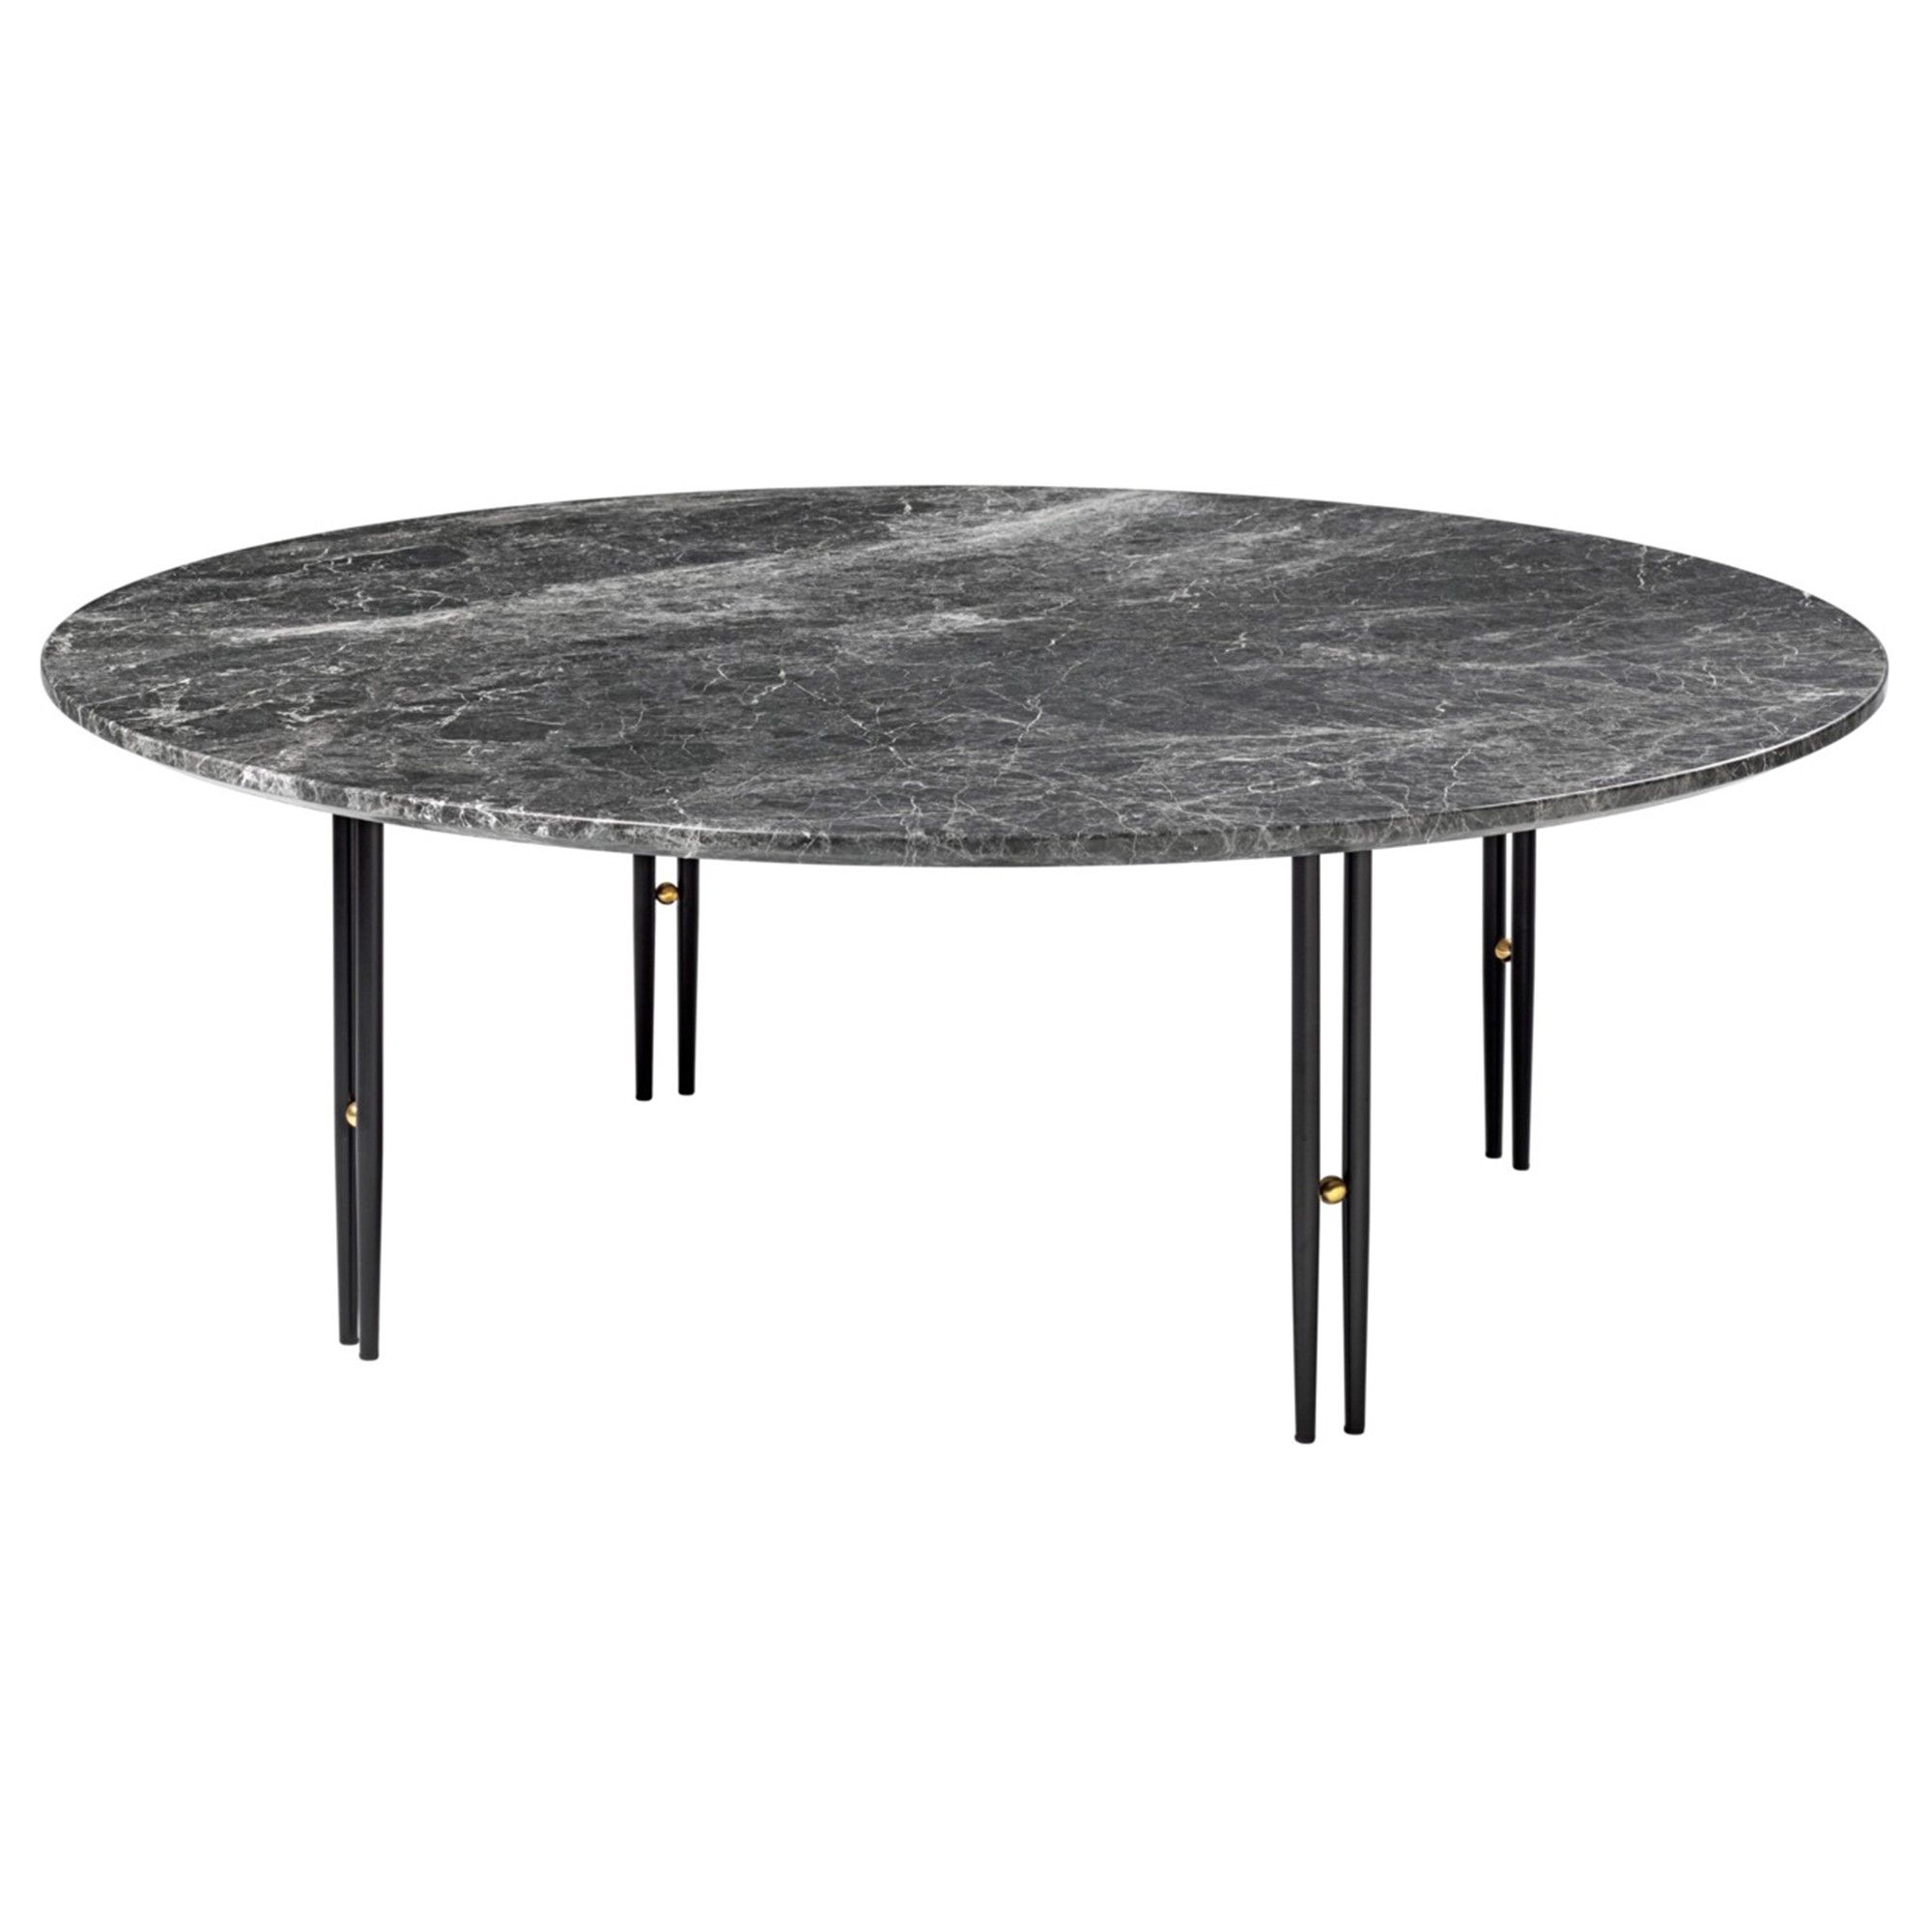 Ioi Coffee Table Ø100 – Black Matt Base, Marble Top – Gubi With Metal Oval Coffee Tables (View 4 of 20)